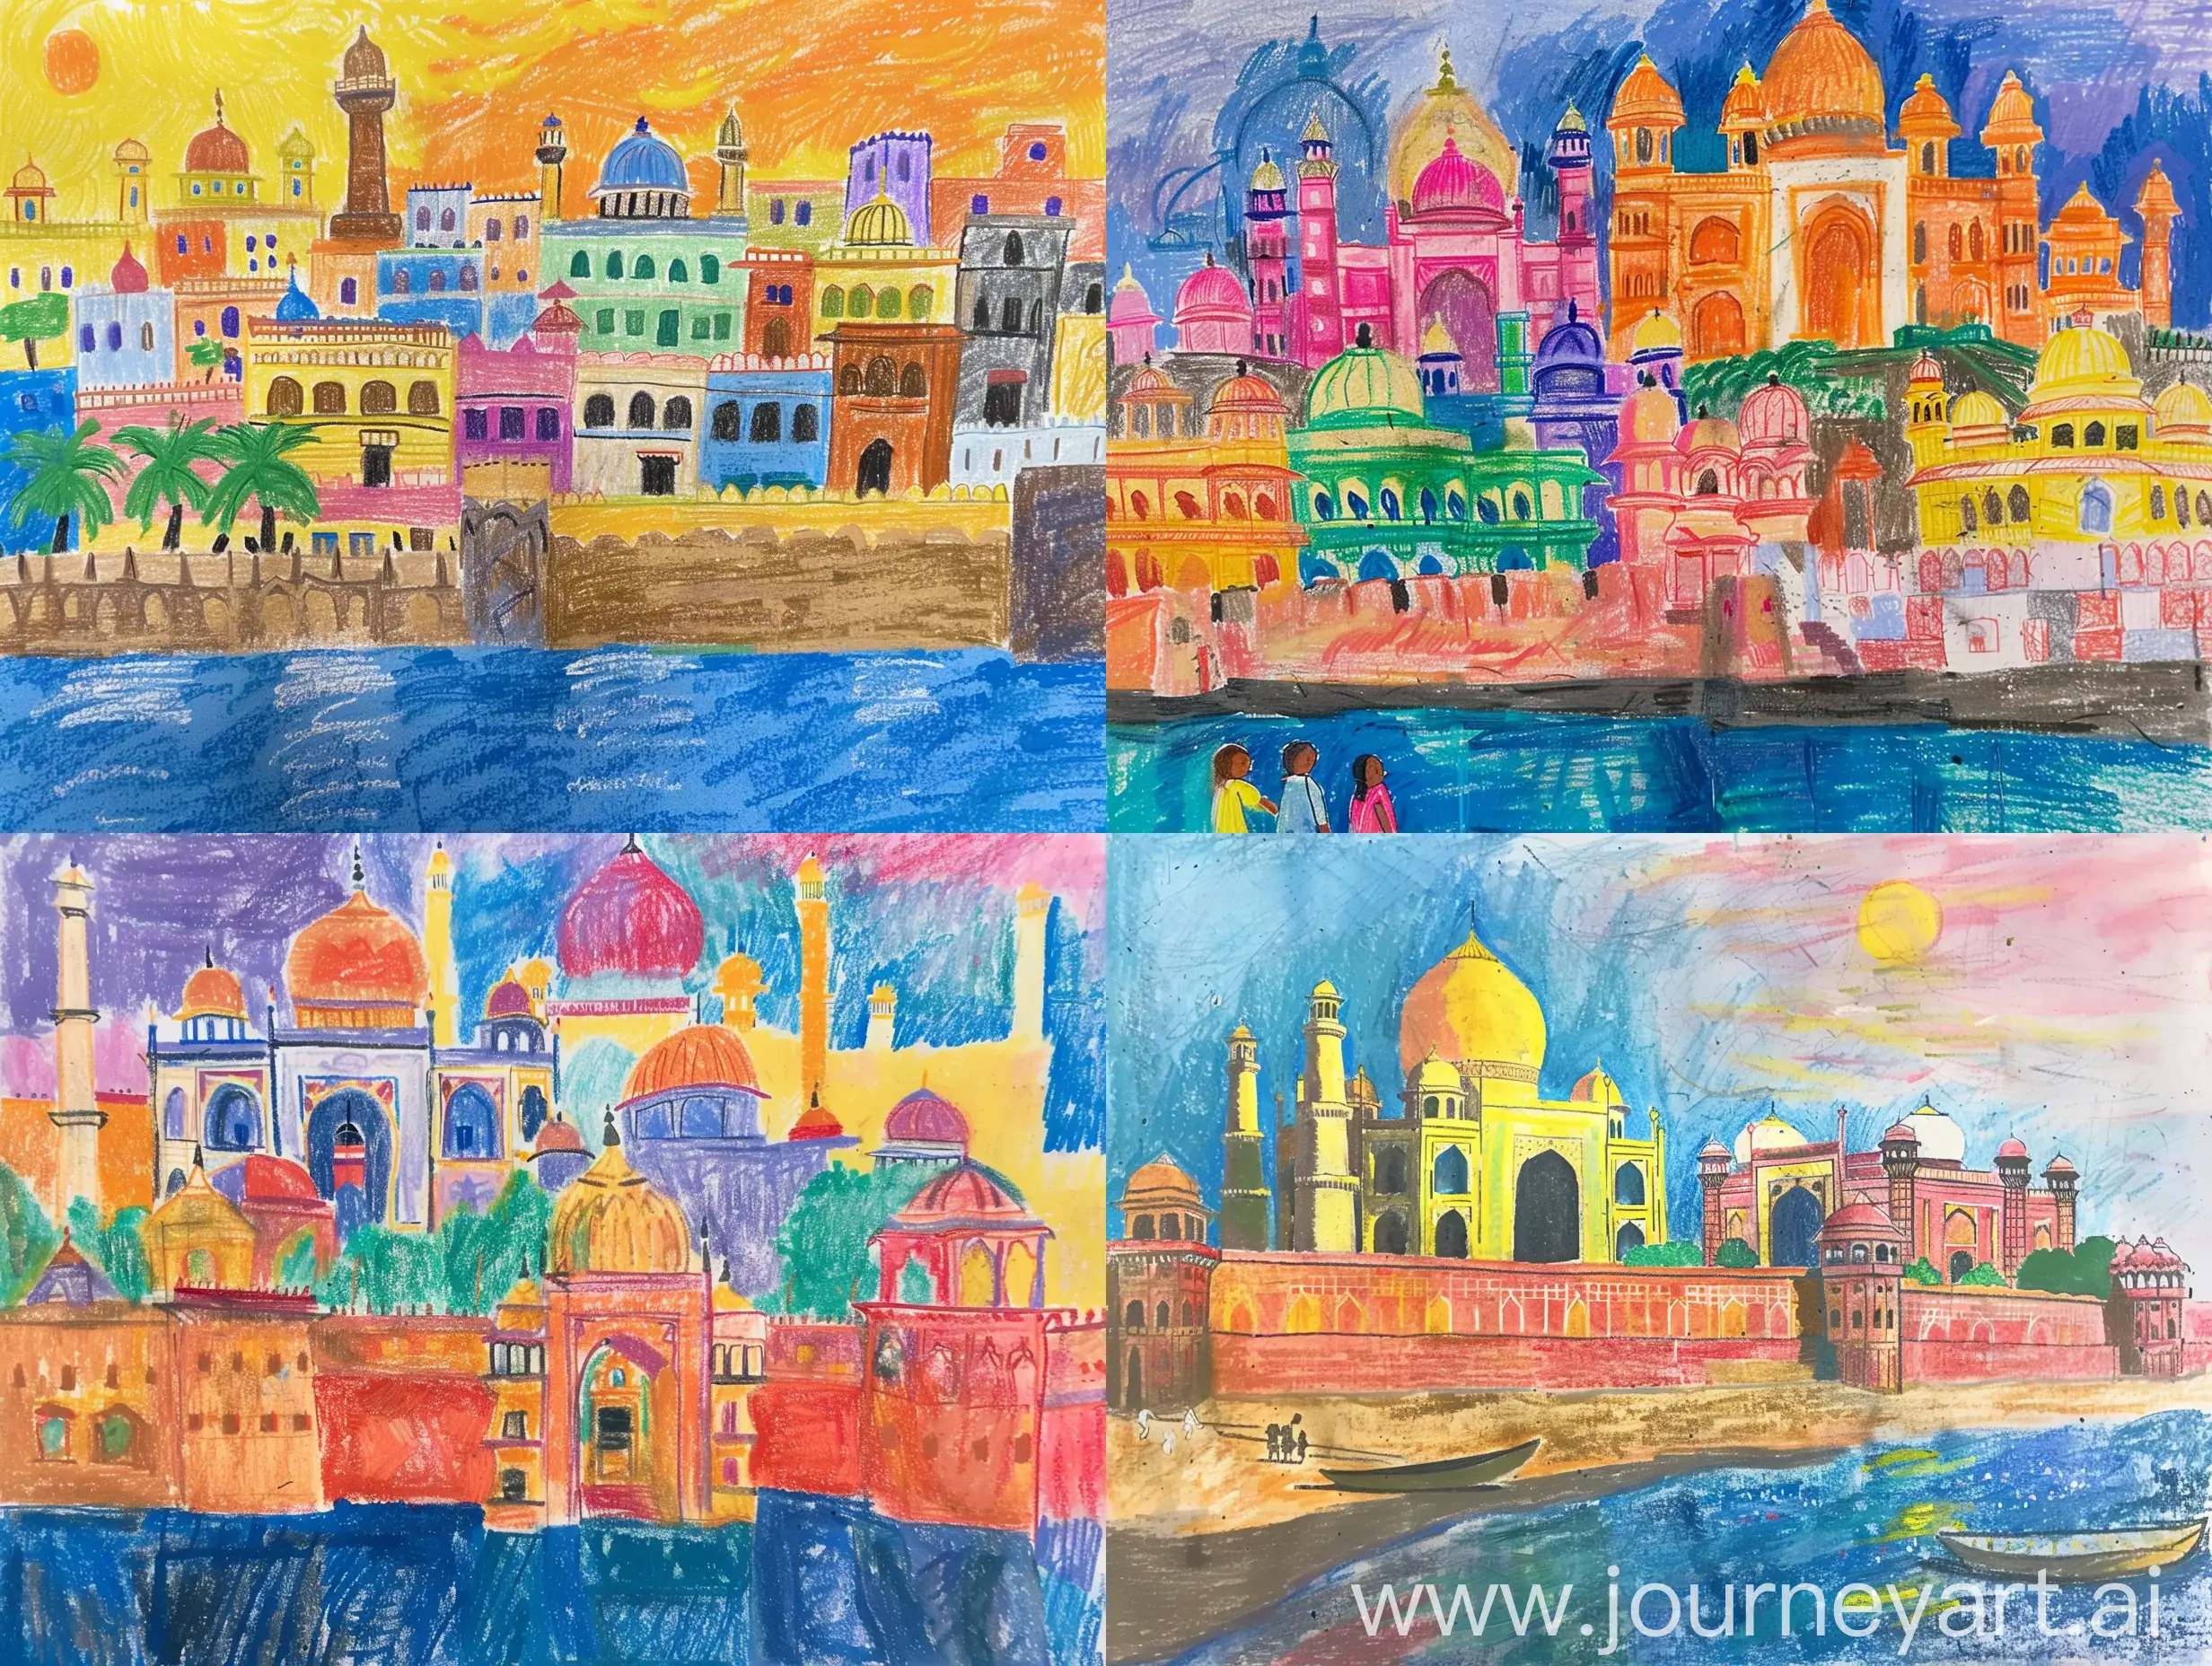 Children's drawing of India in pastel